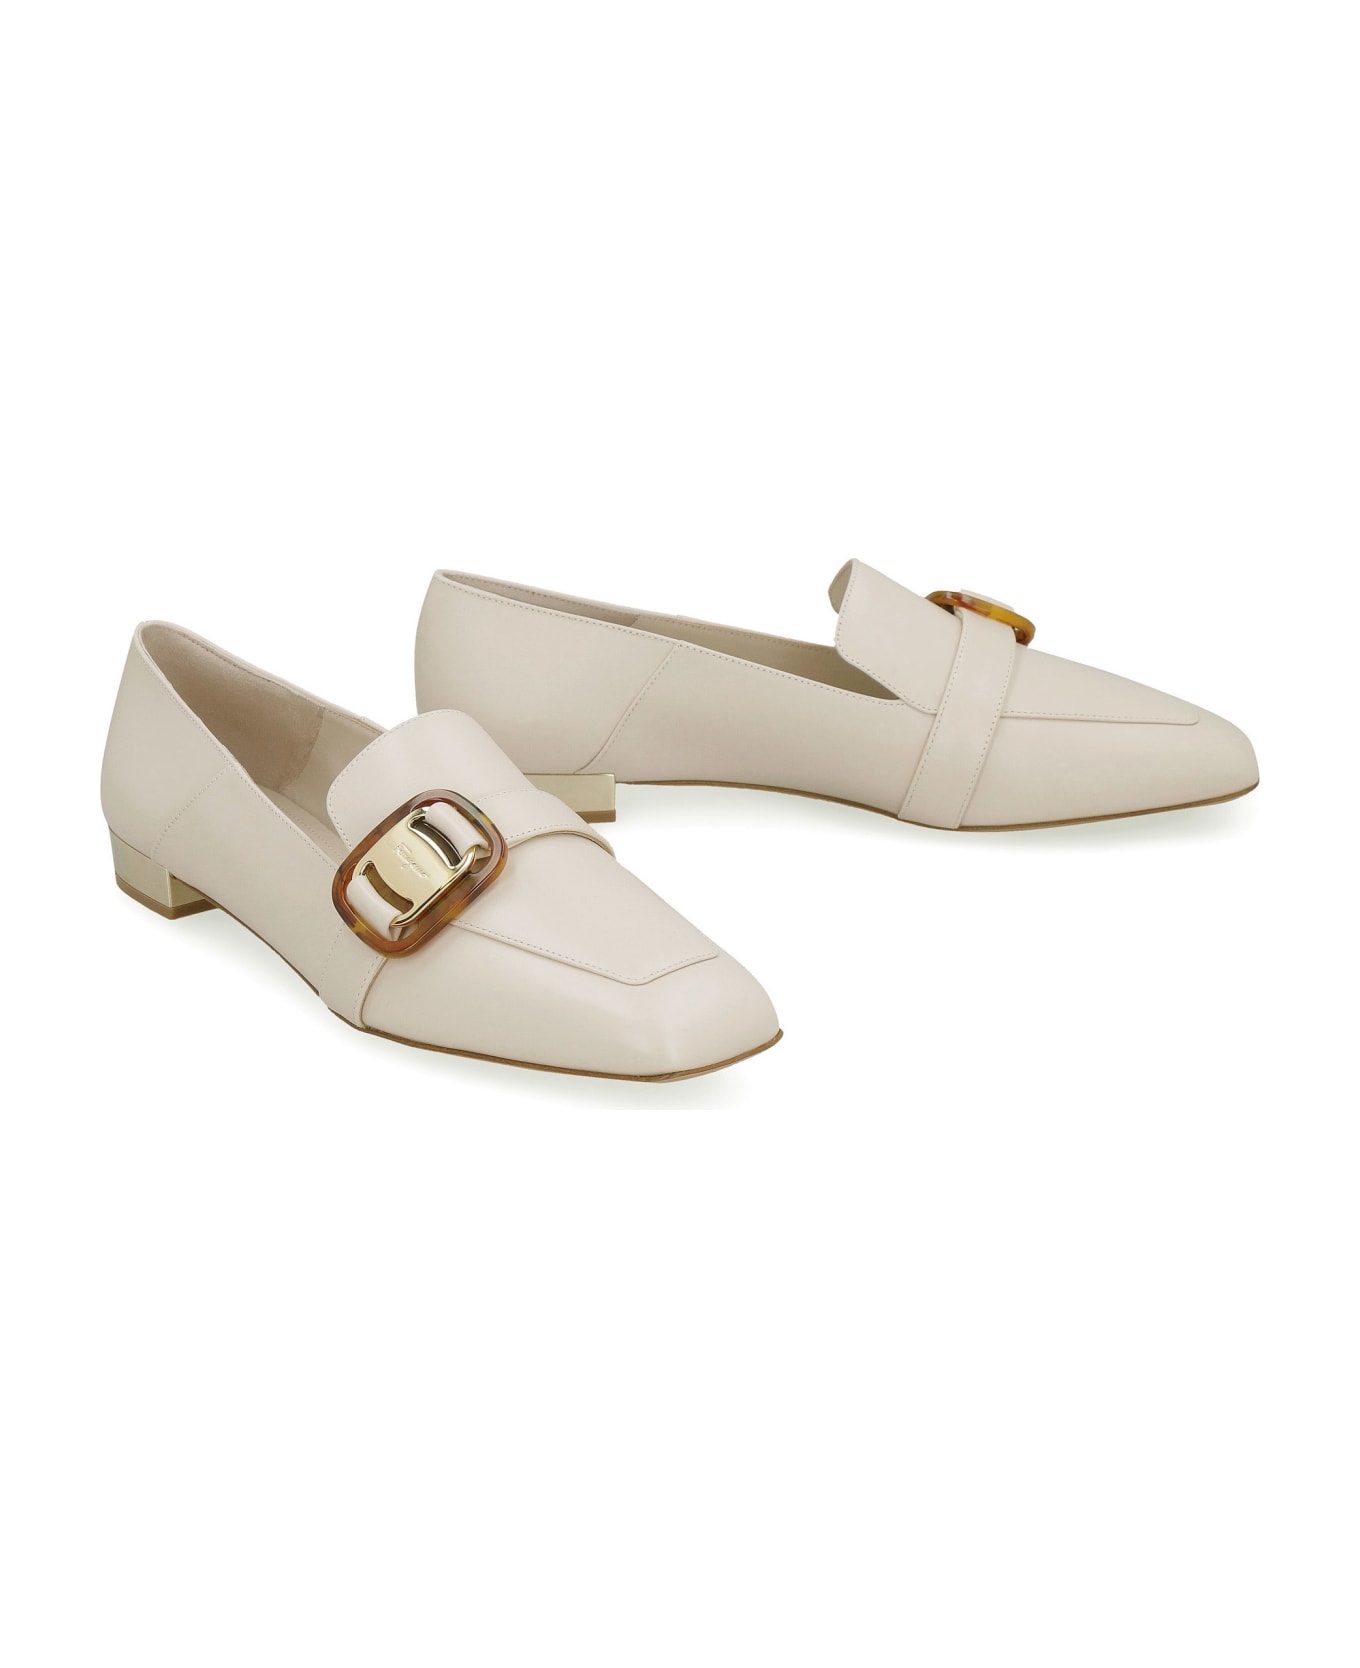 Ferragamo Wang Leather Loafers - Ivory